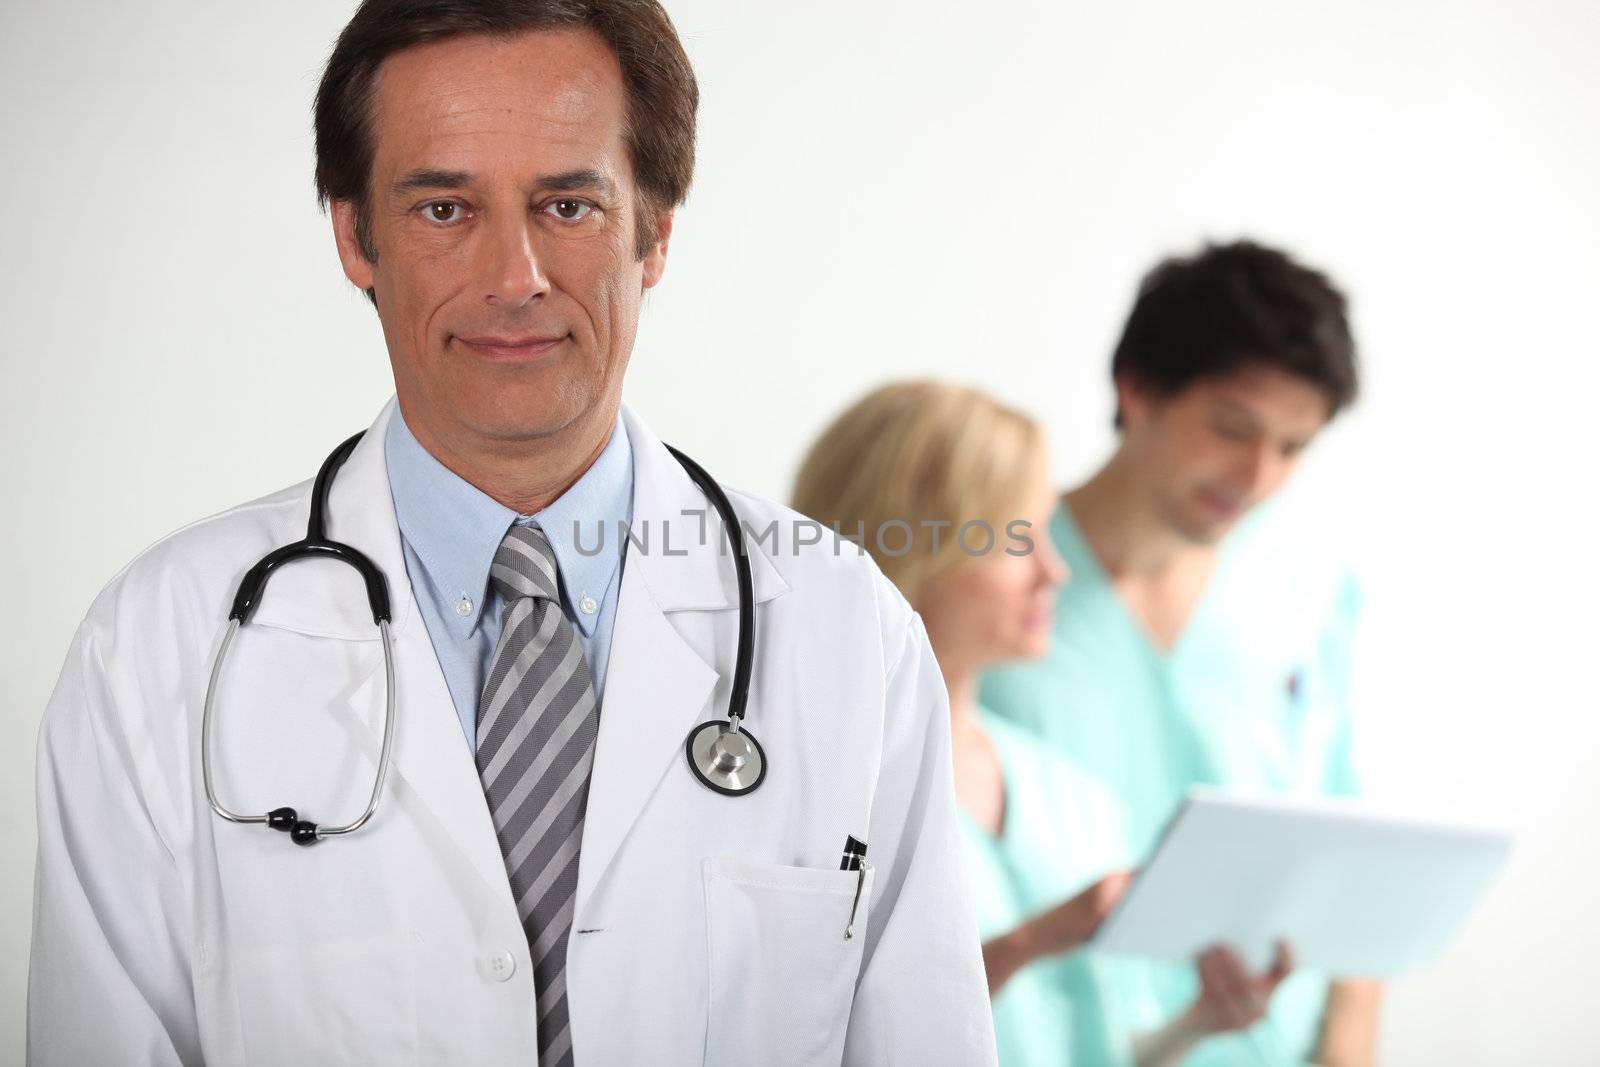 Doctor stood in front of colleagues